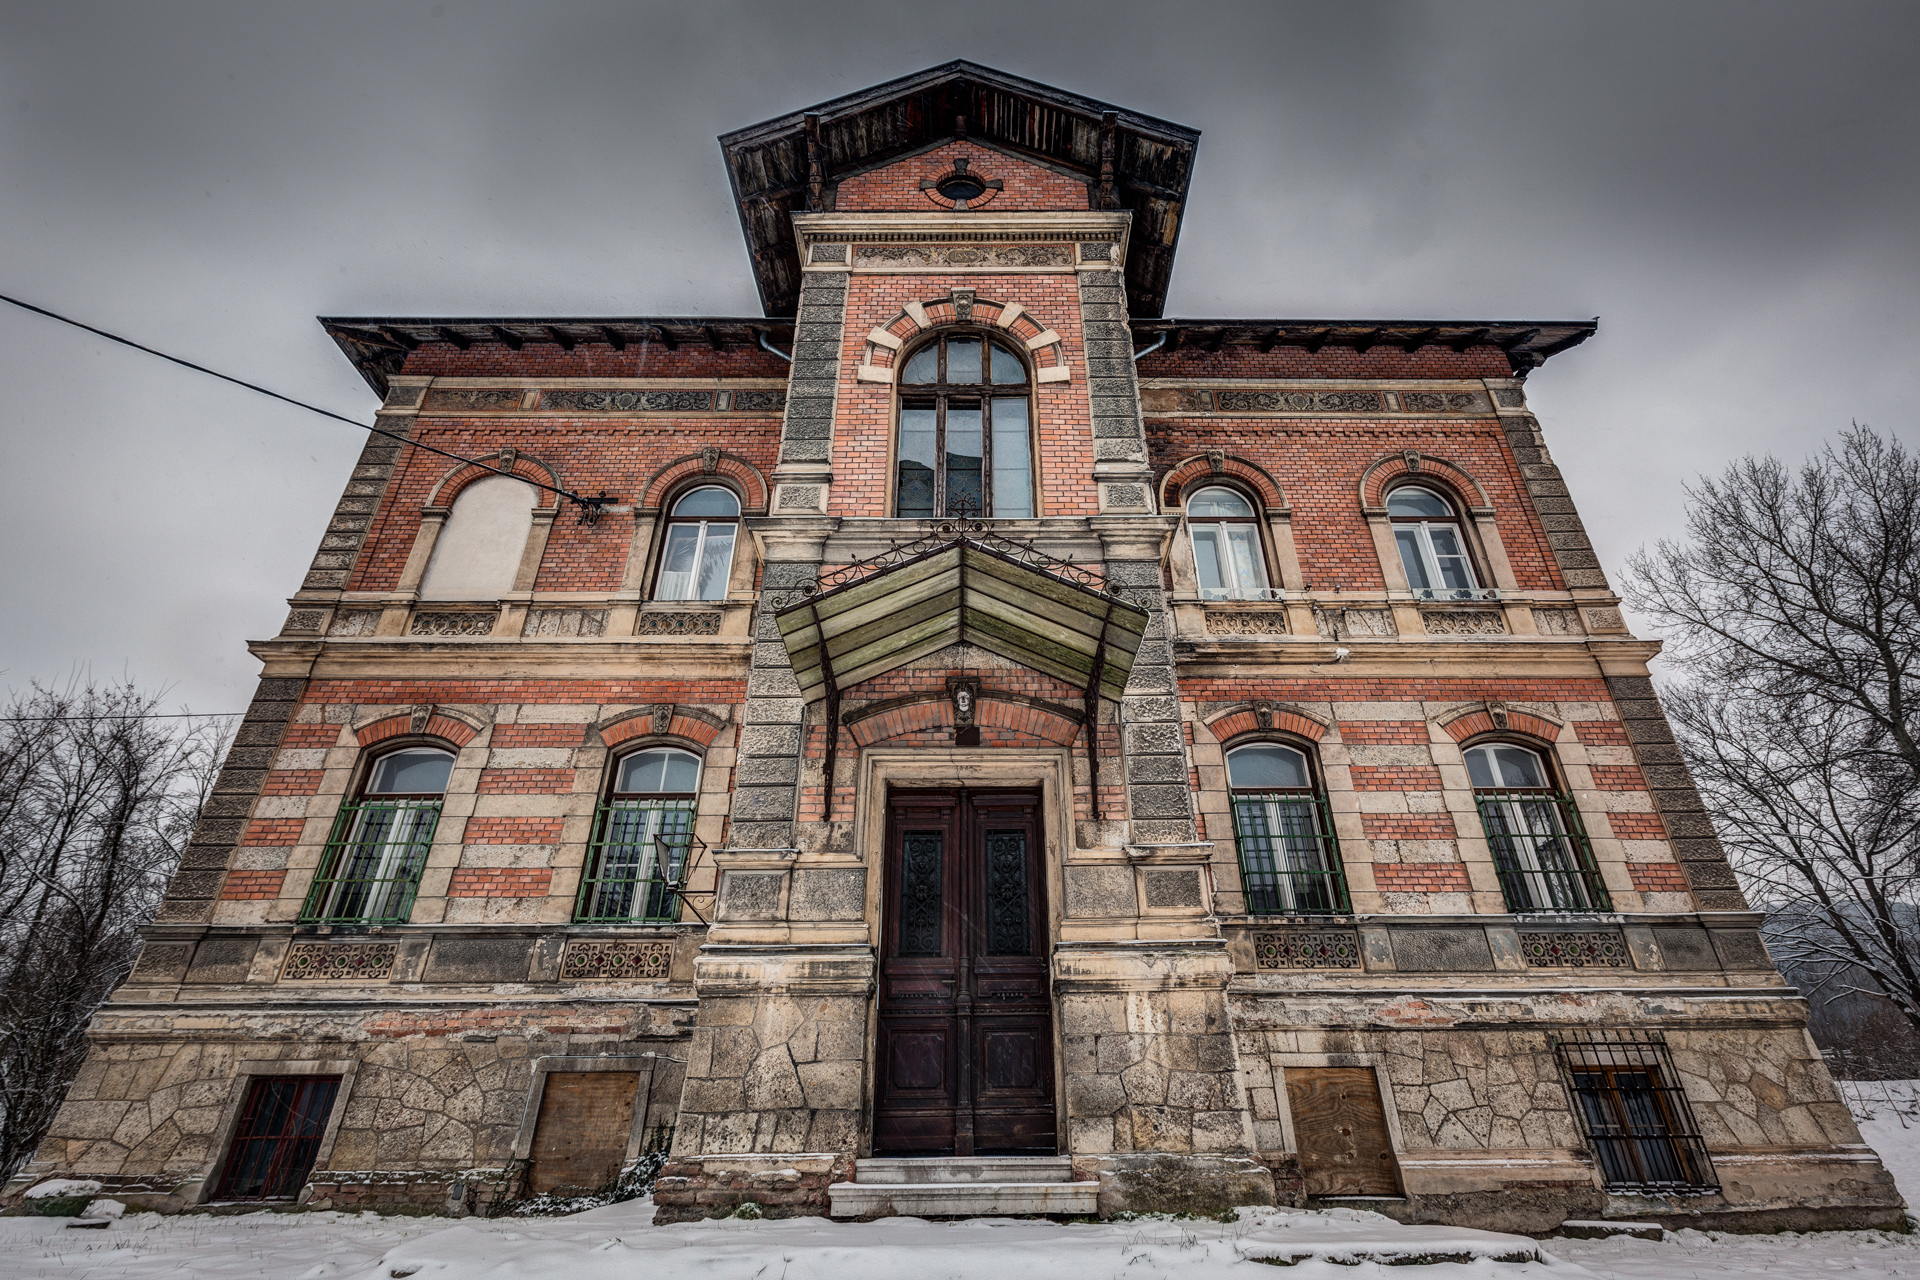 Urban Exploration - Villa BE - Another Winter Day